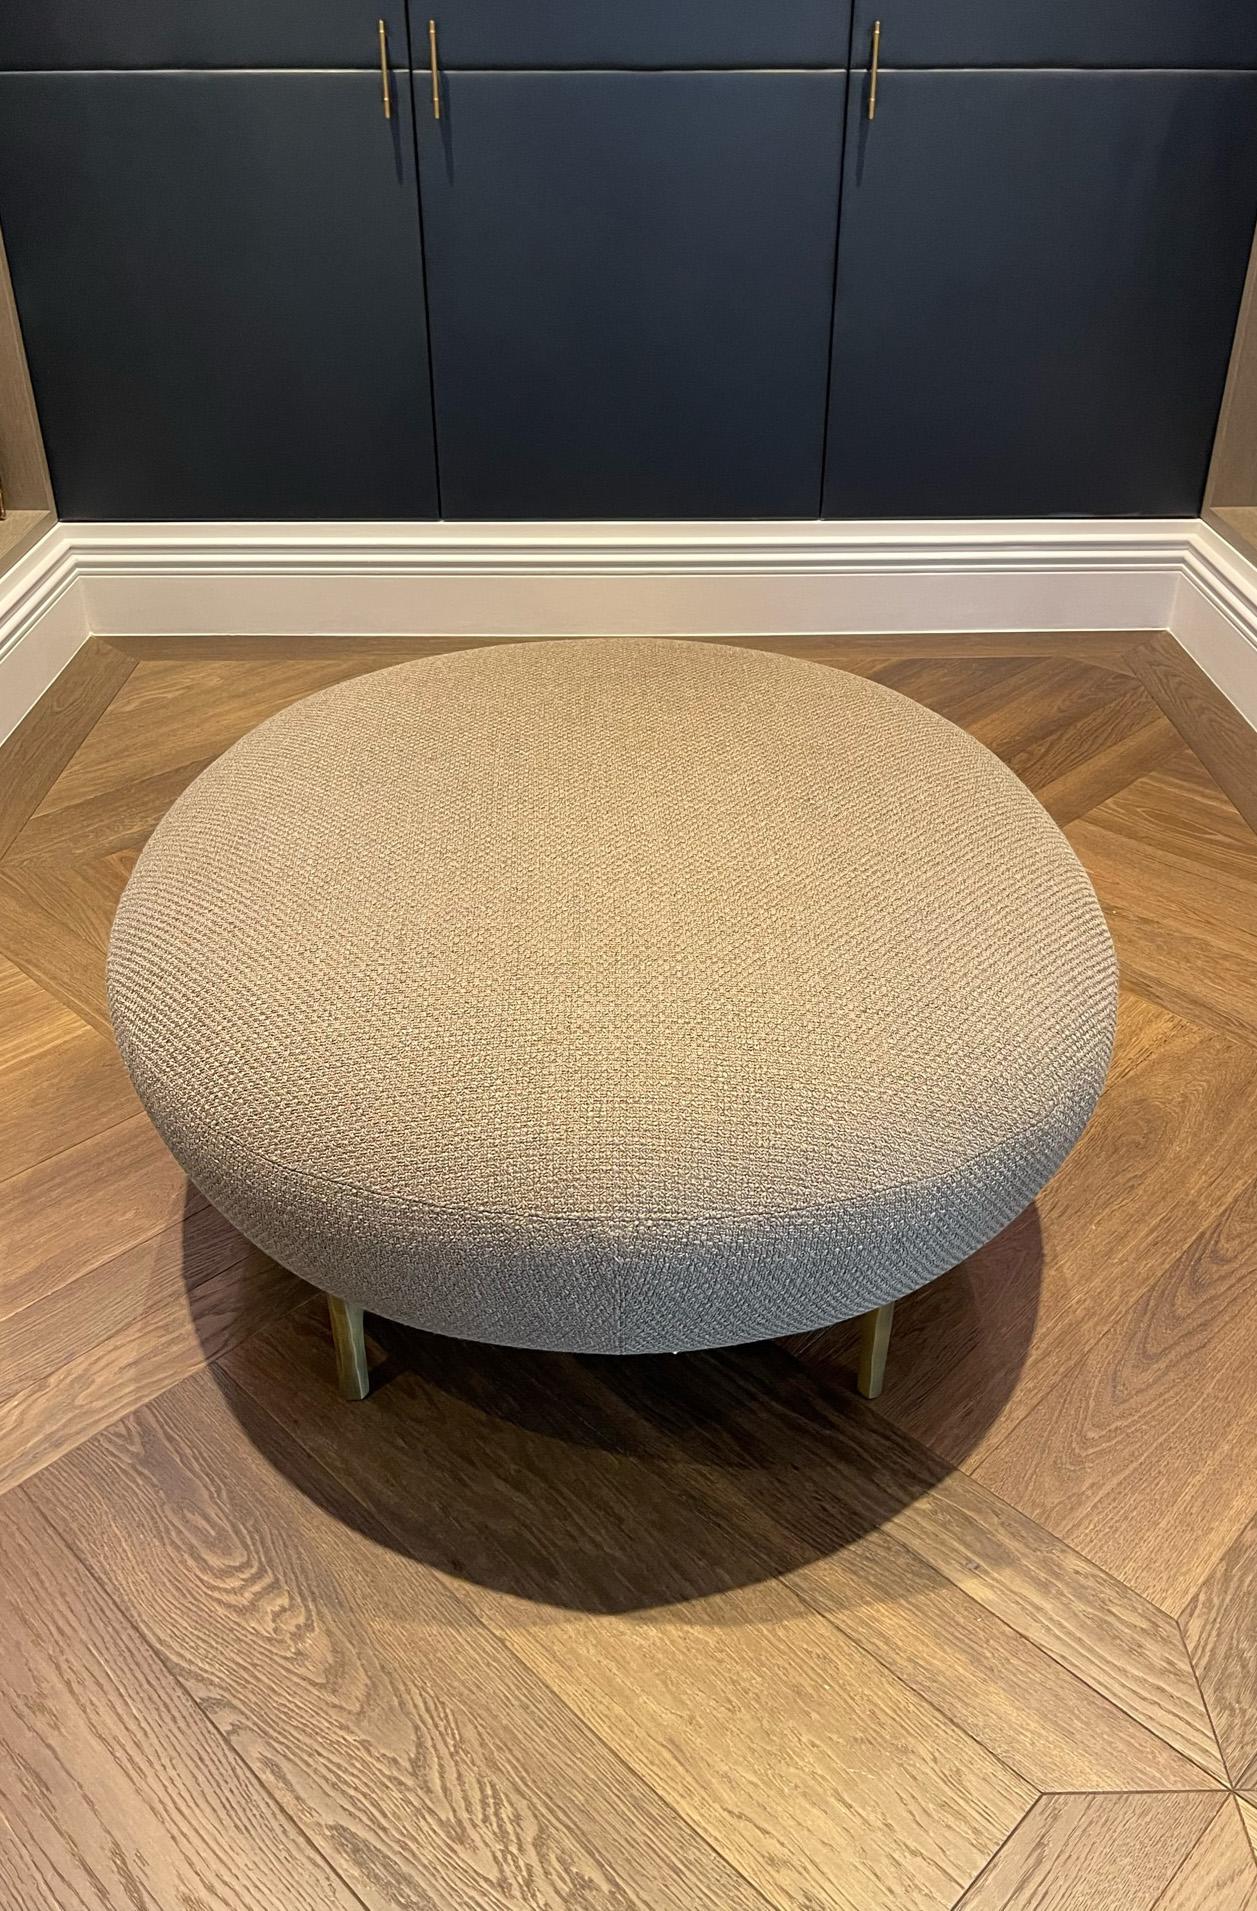 Ella Poof by Studio Piet Boon.

A wonderful and 'organically circular' shape makes up this Ella pouf ottoman by Piet Boon. 

The sumptuous thick top of the ottoman pouf is held up with 4 sculptural legs, which have been cast in bronze. The top is